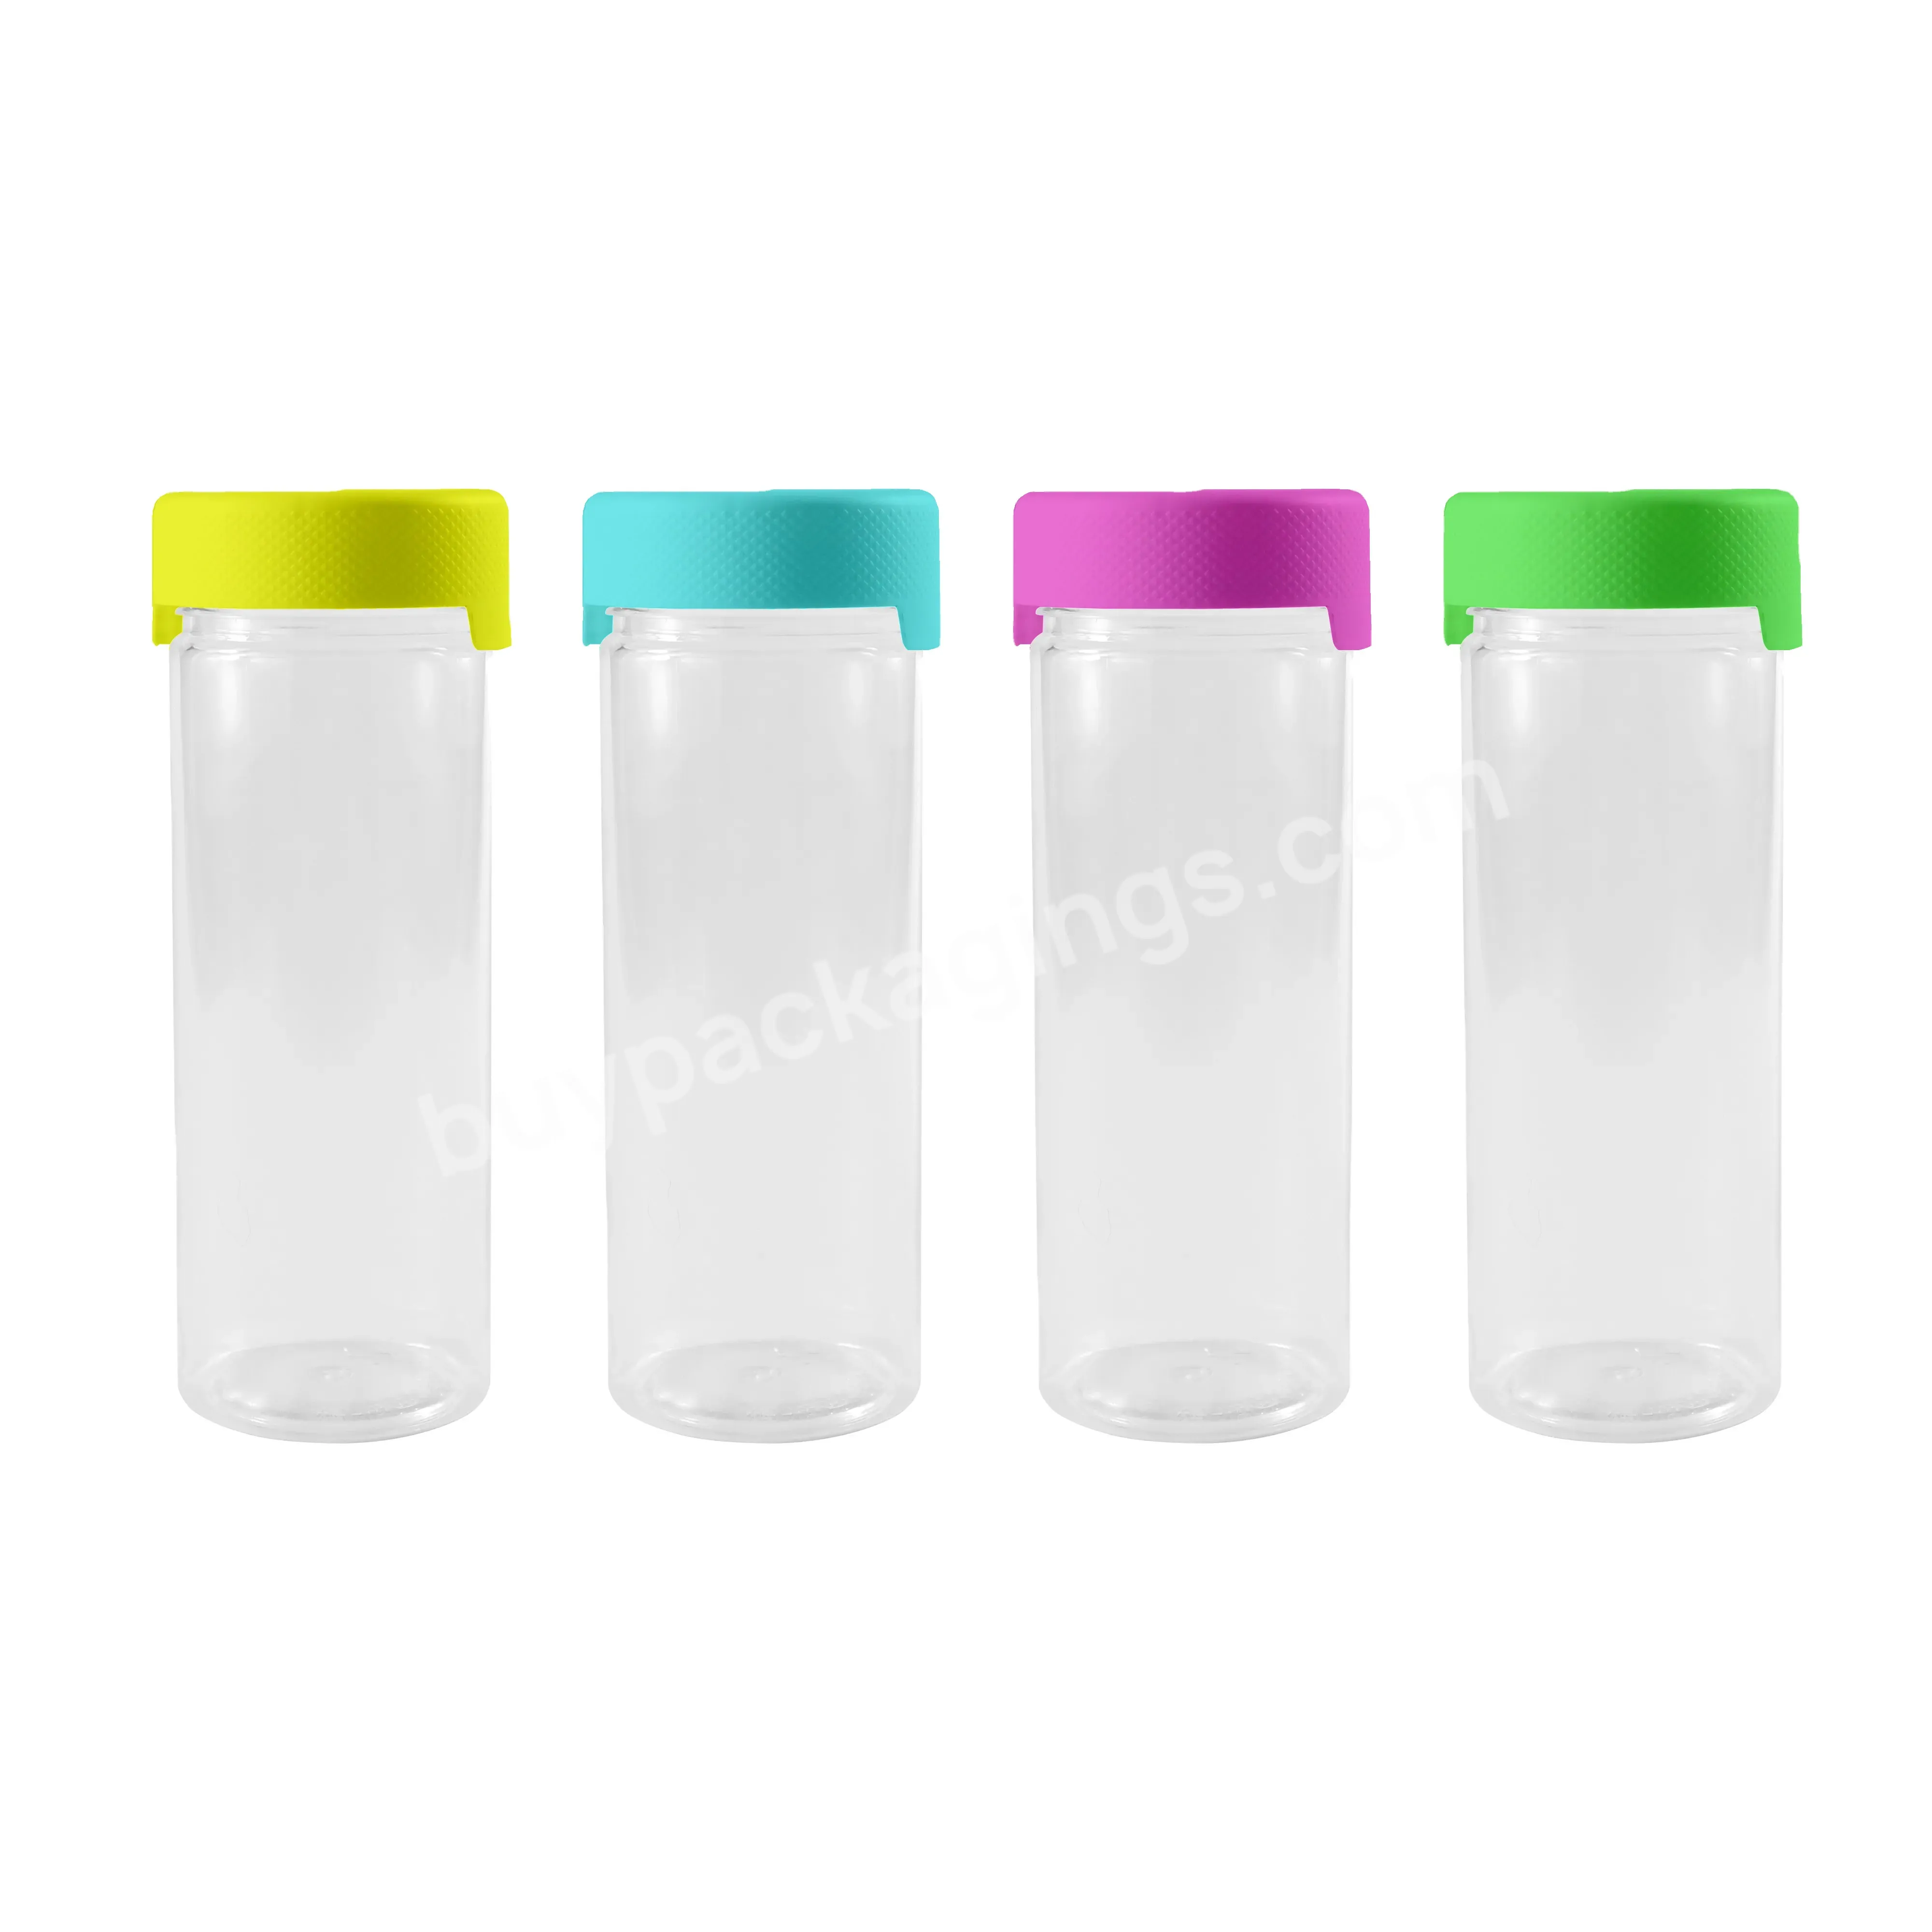 Oem Pp Plastic Pop Top Jars Child Proof Container For Candy Herb Packaging Preroll Packaging